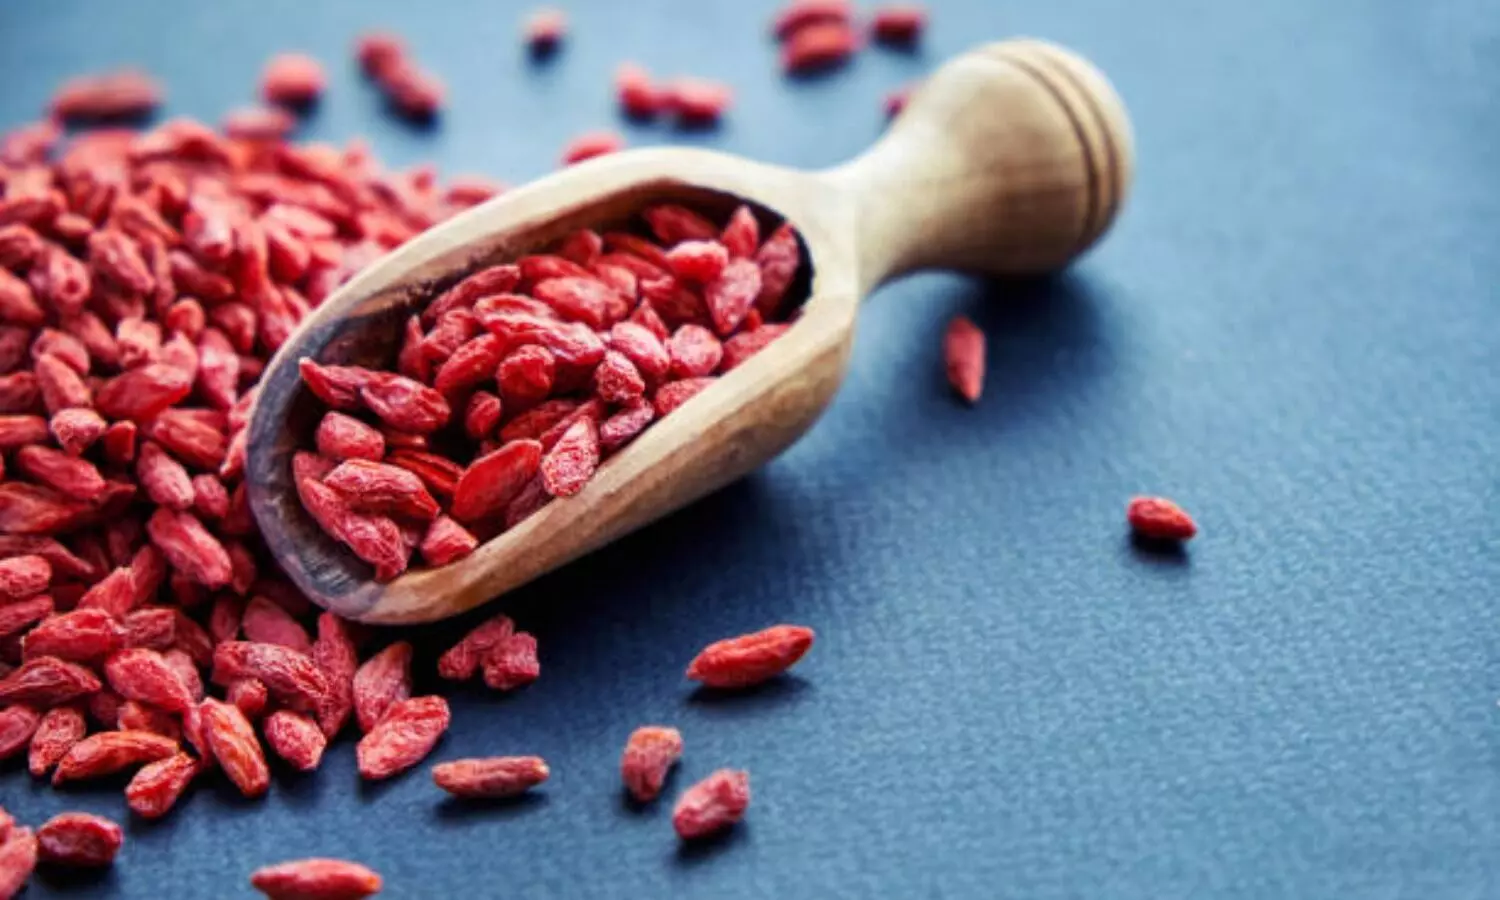 Inclusion of goji berry in diet may help reduce long-term CVD risk: Study